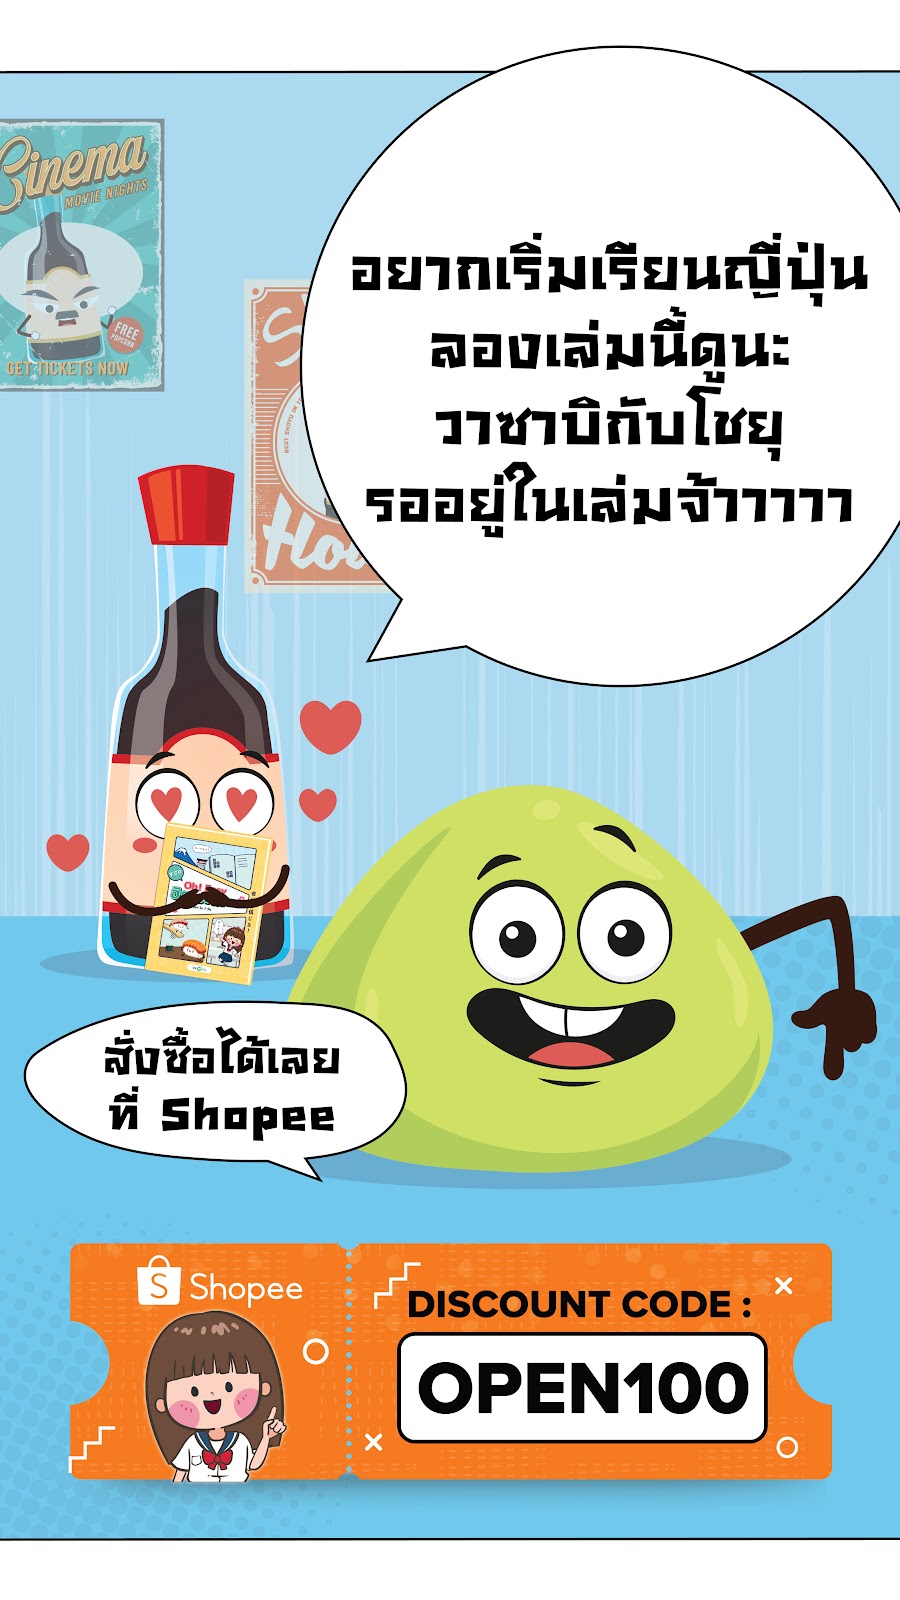 Wasabi and Shoyu character invite everyone to learn Japanese start with Oh! Easy Hiragana book and also give 100 baht discount code at shopee.